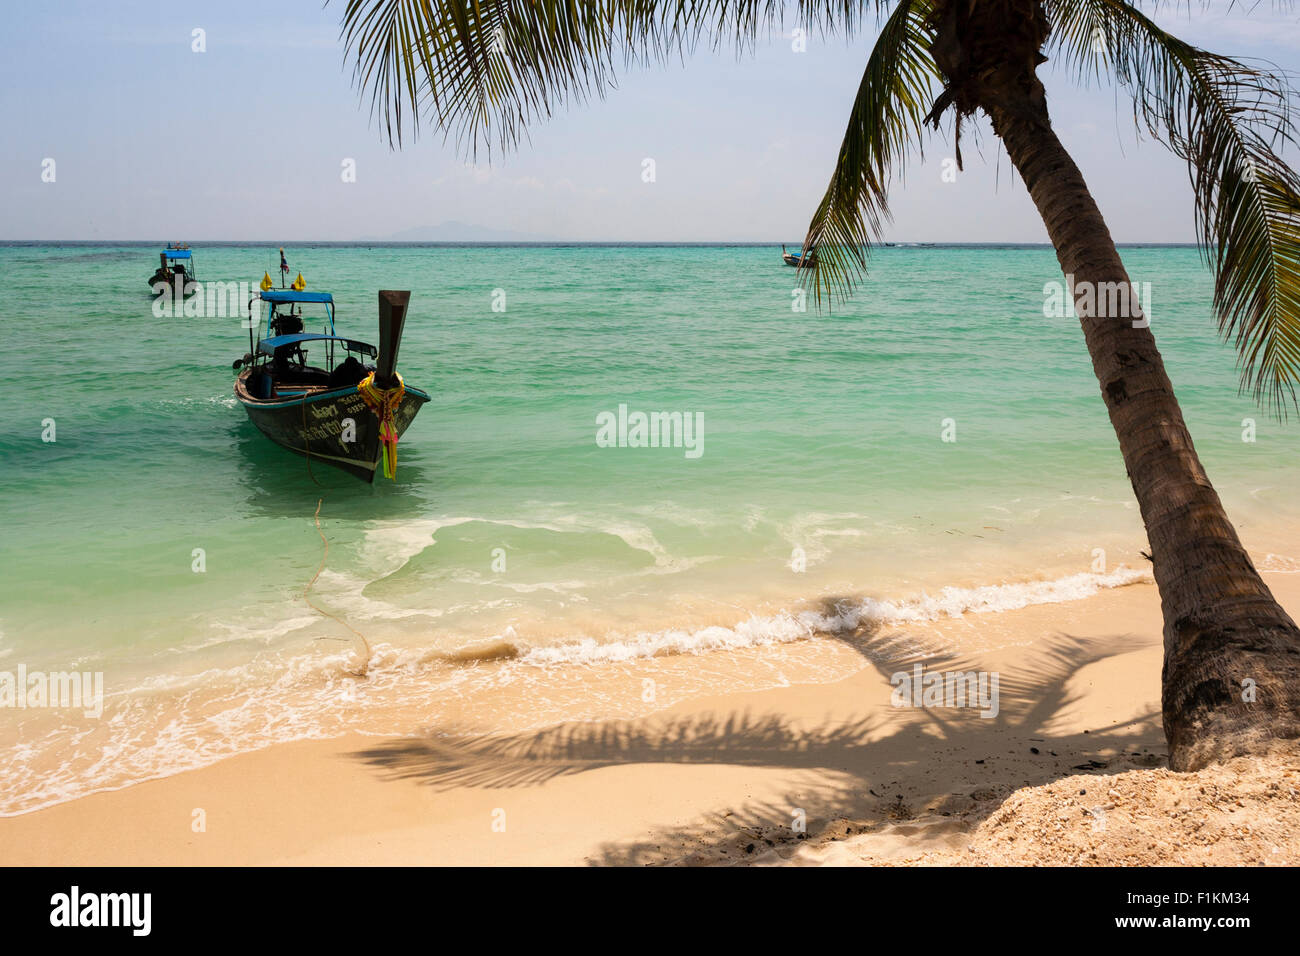 Late morning on a beach where a water taxi waits, Koh Phi Phi Don, Thailand. Stock Photo